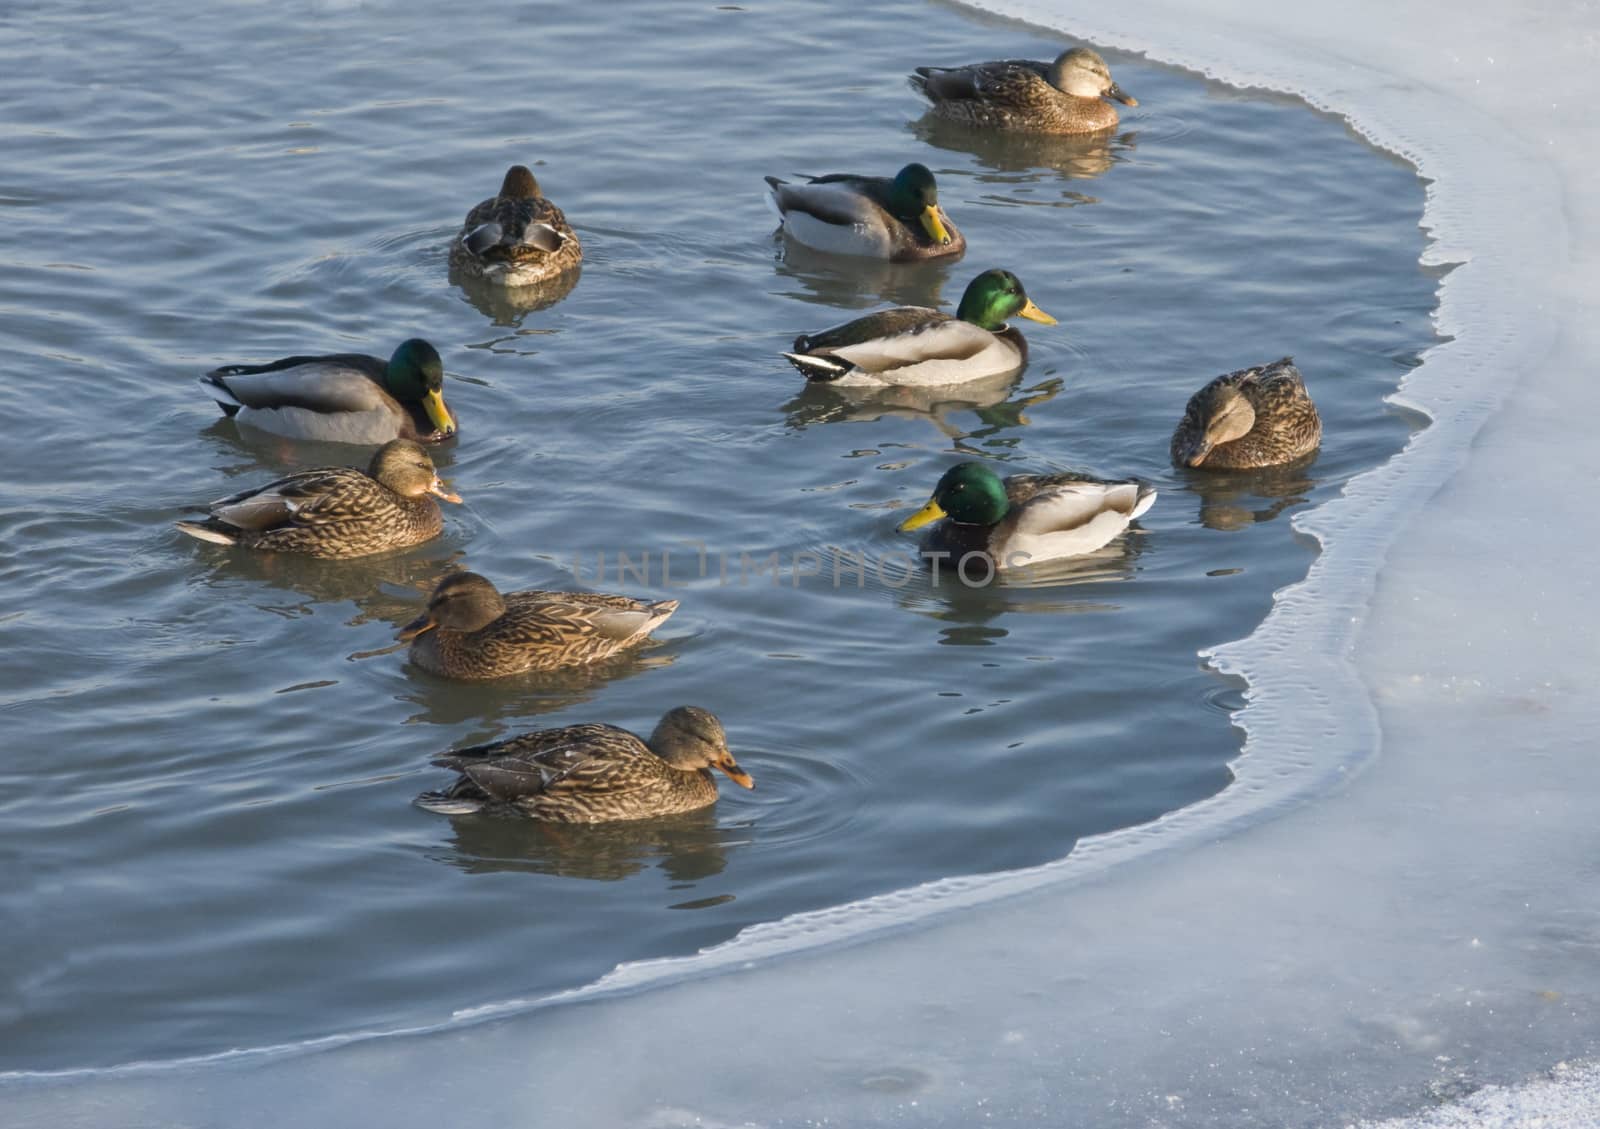 Winter pond with flock of swimming ducks